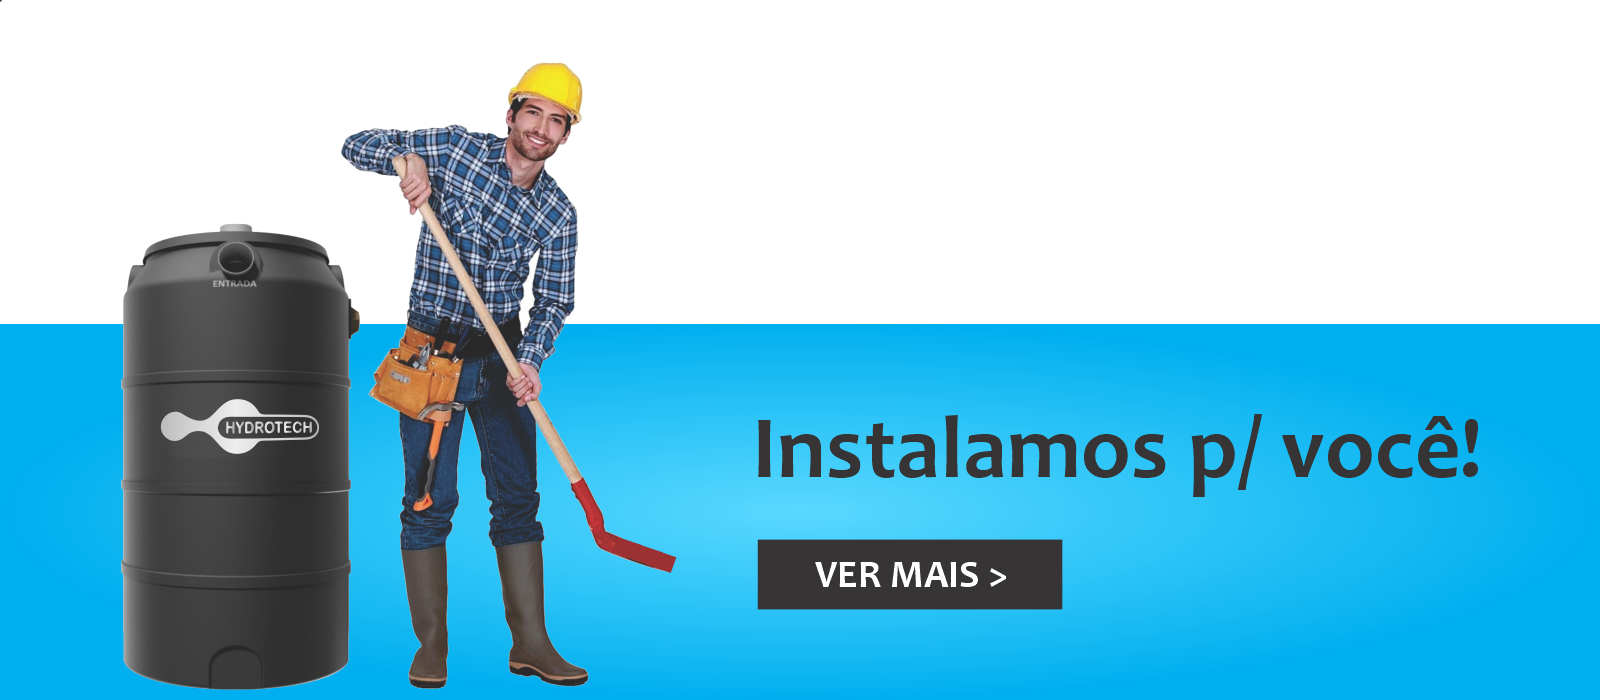 https://images.yampi.me/assets/stores/hydrotech-brasil/uploads/banners/645c64330fe69.png